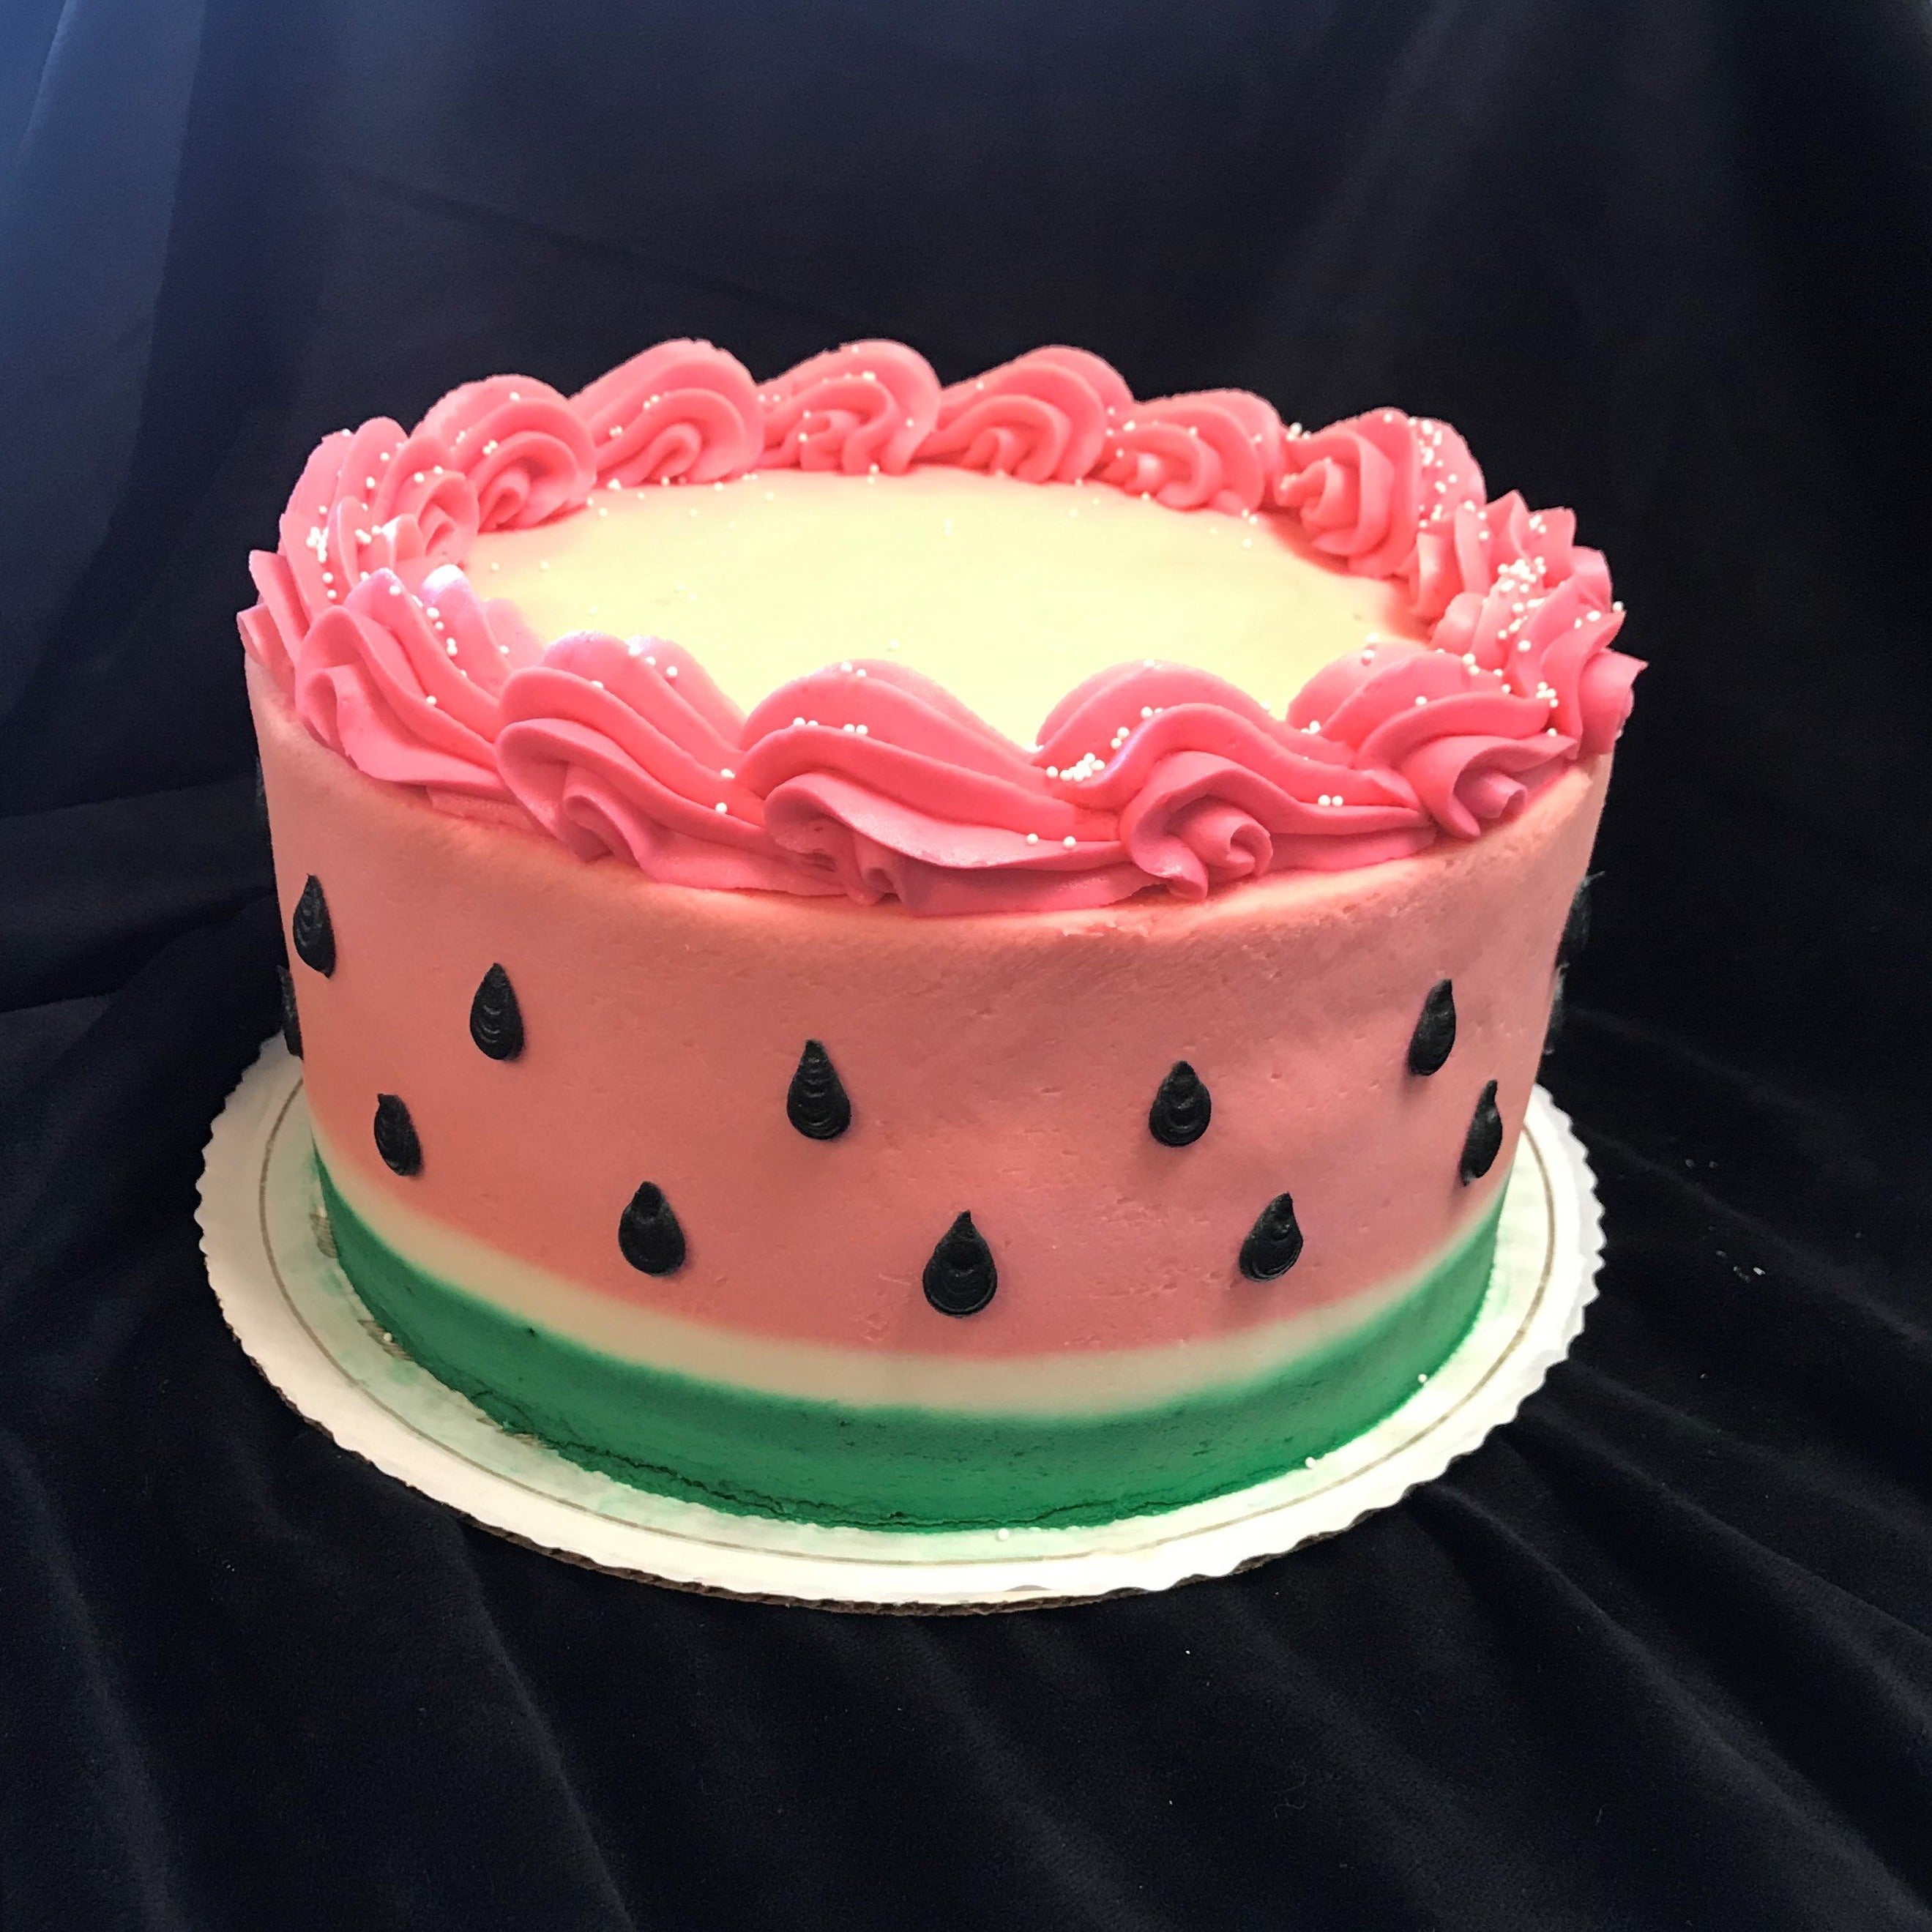 8 Inch Two-layer Cake